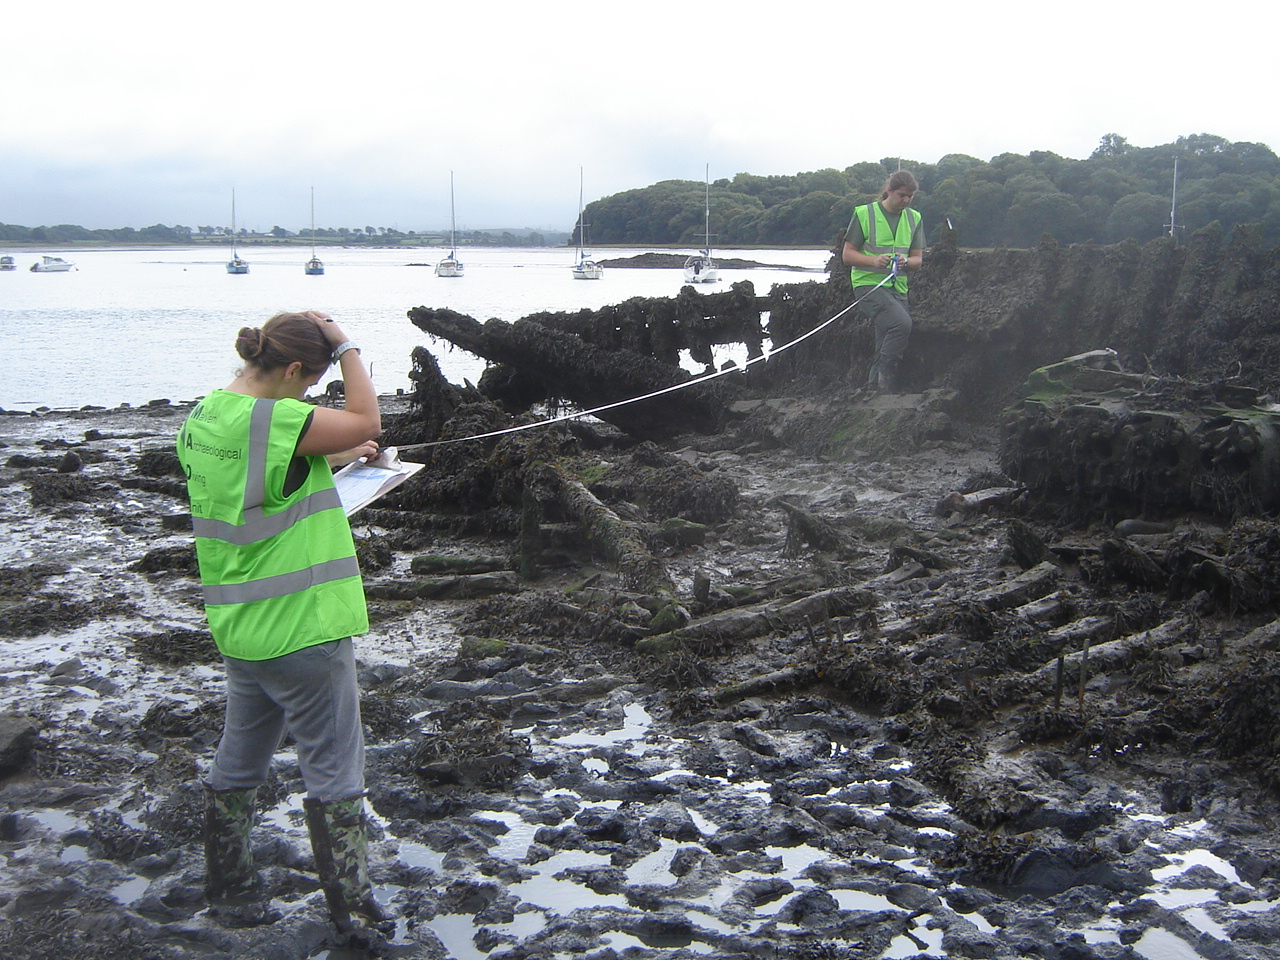 Surveying the wreck of the Helping Hand at Lawrenny